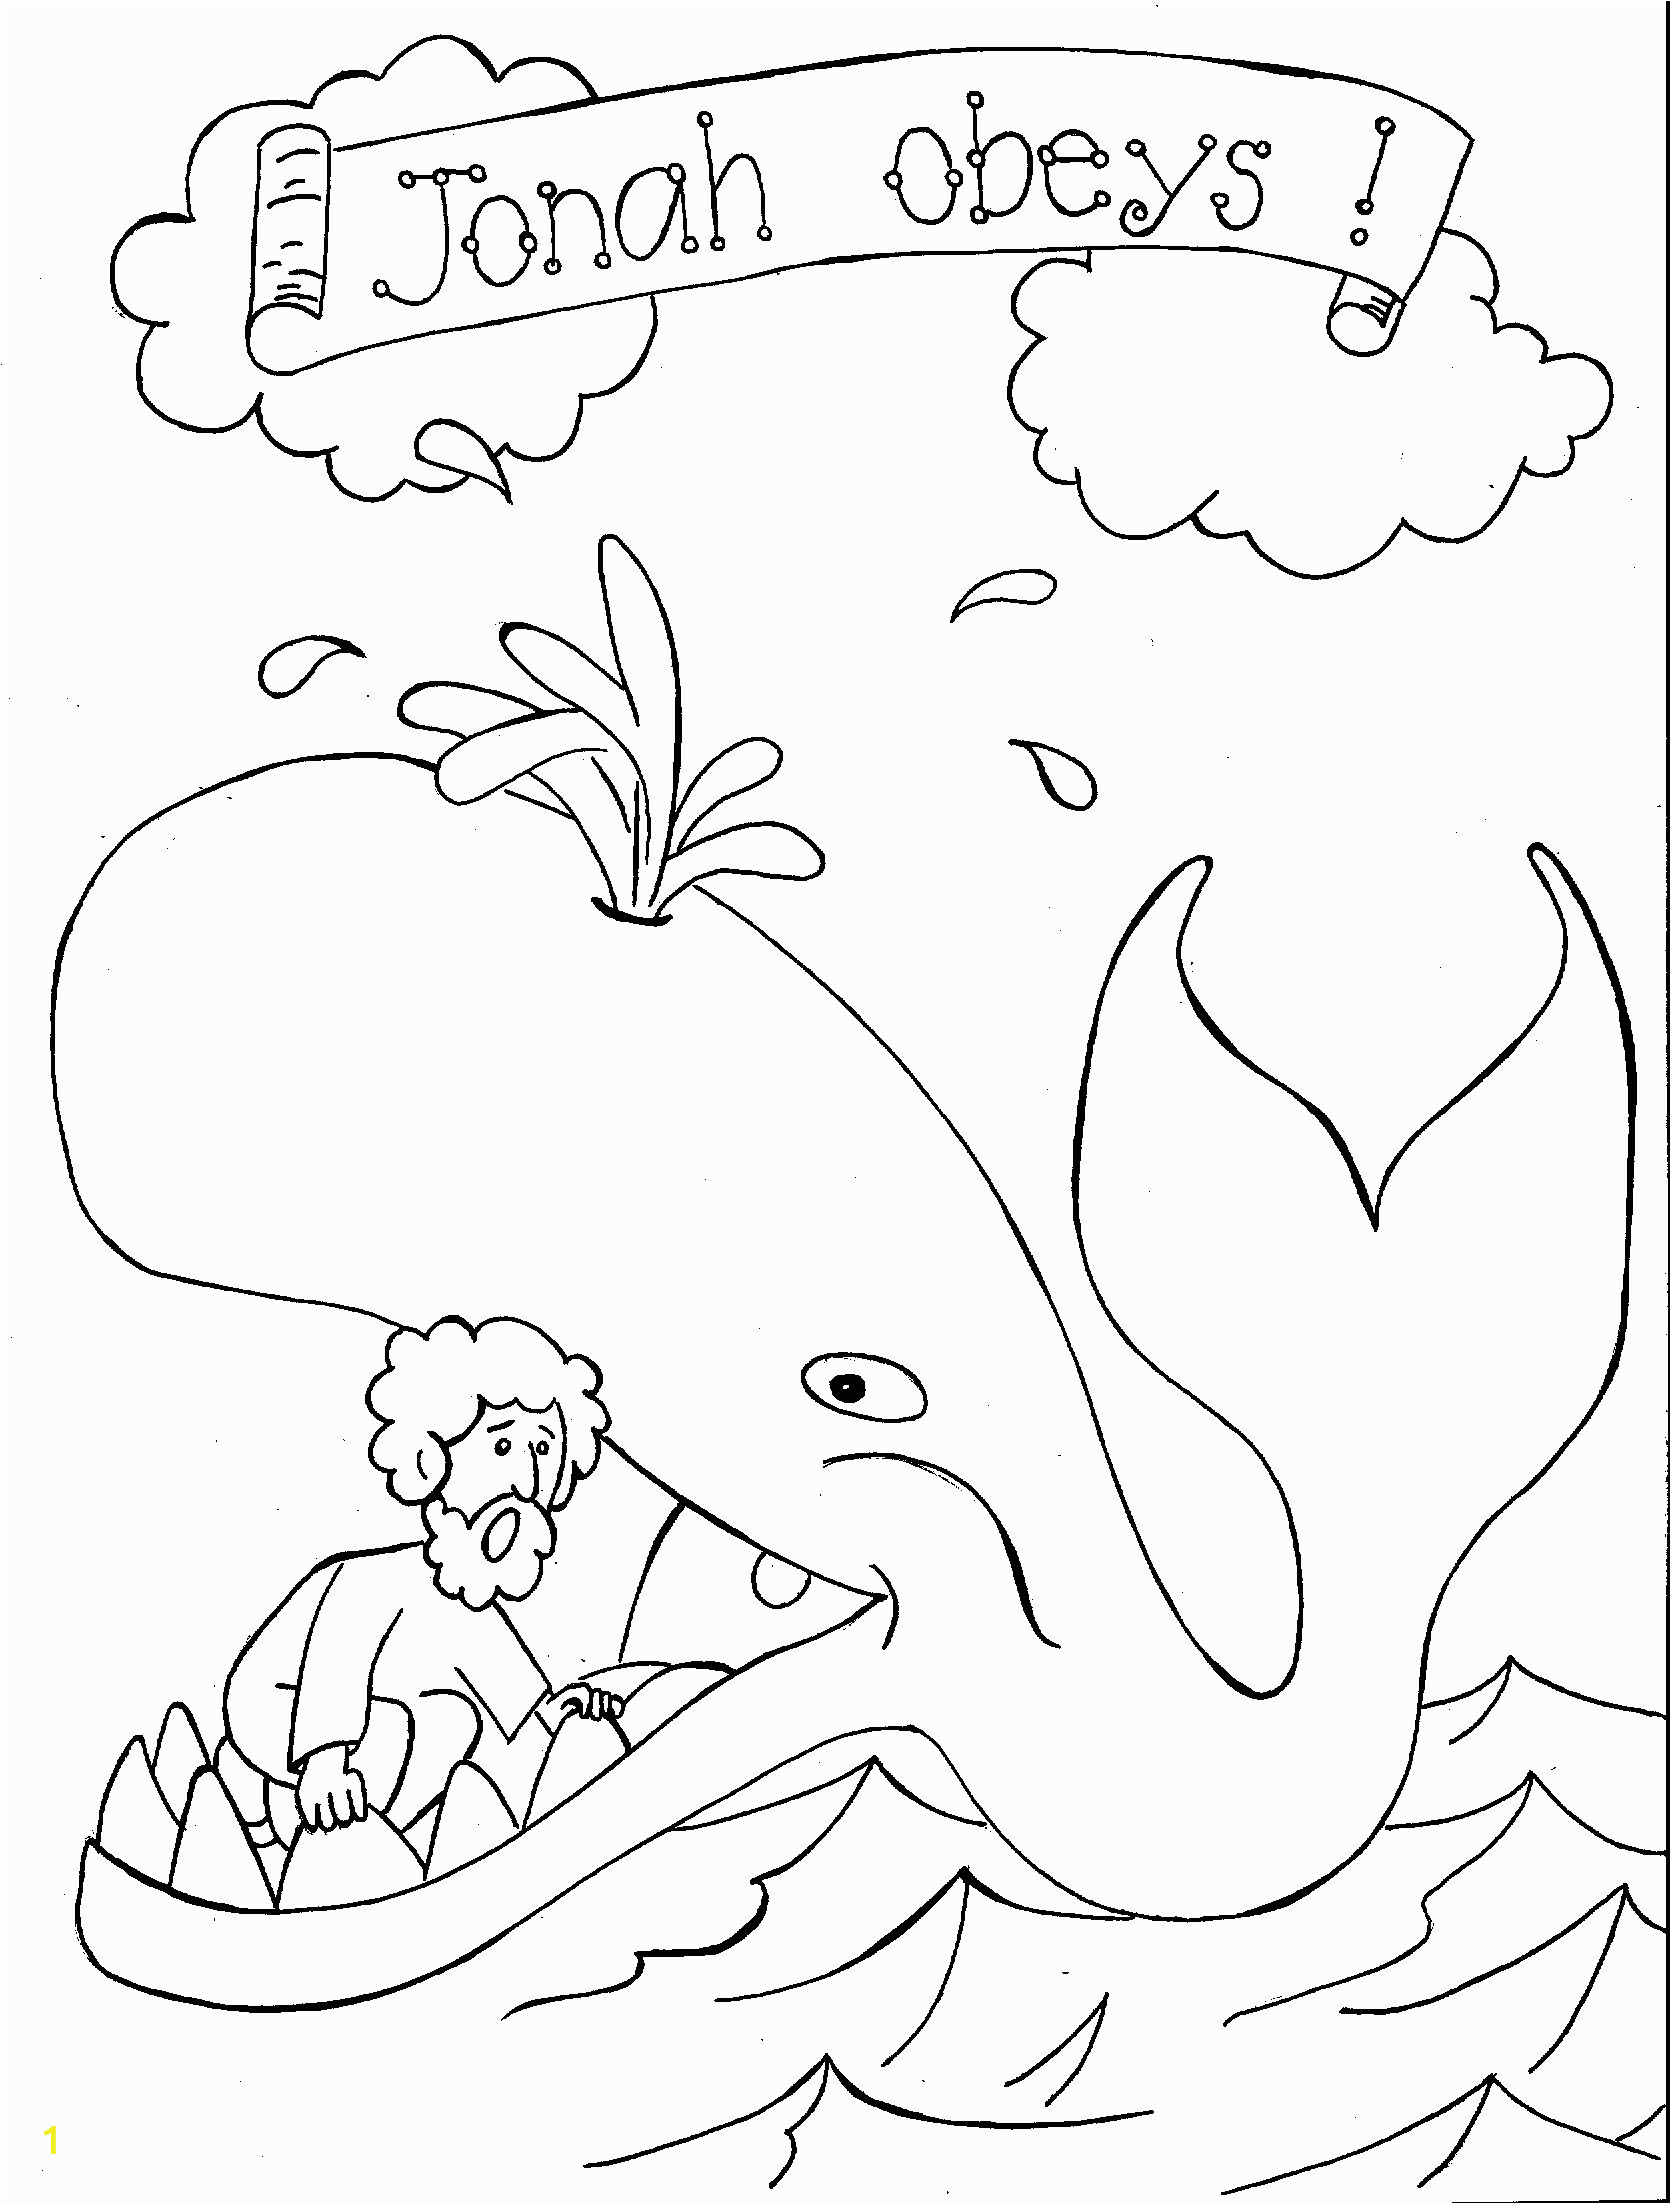 Jonah Runs From God Coloring Page Coloring Book Splendi Children Bible Coloring Pages